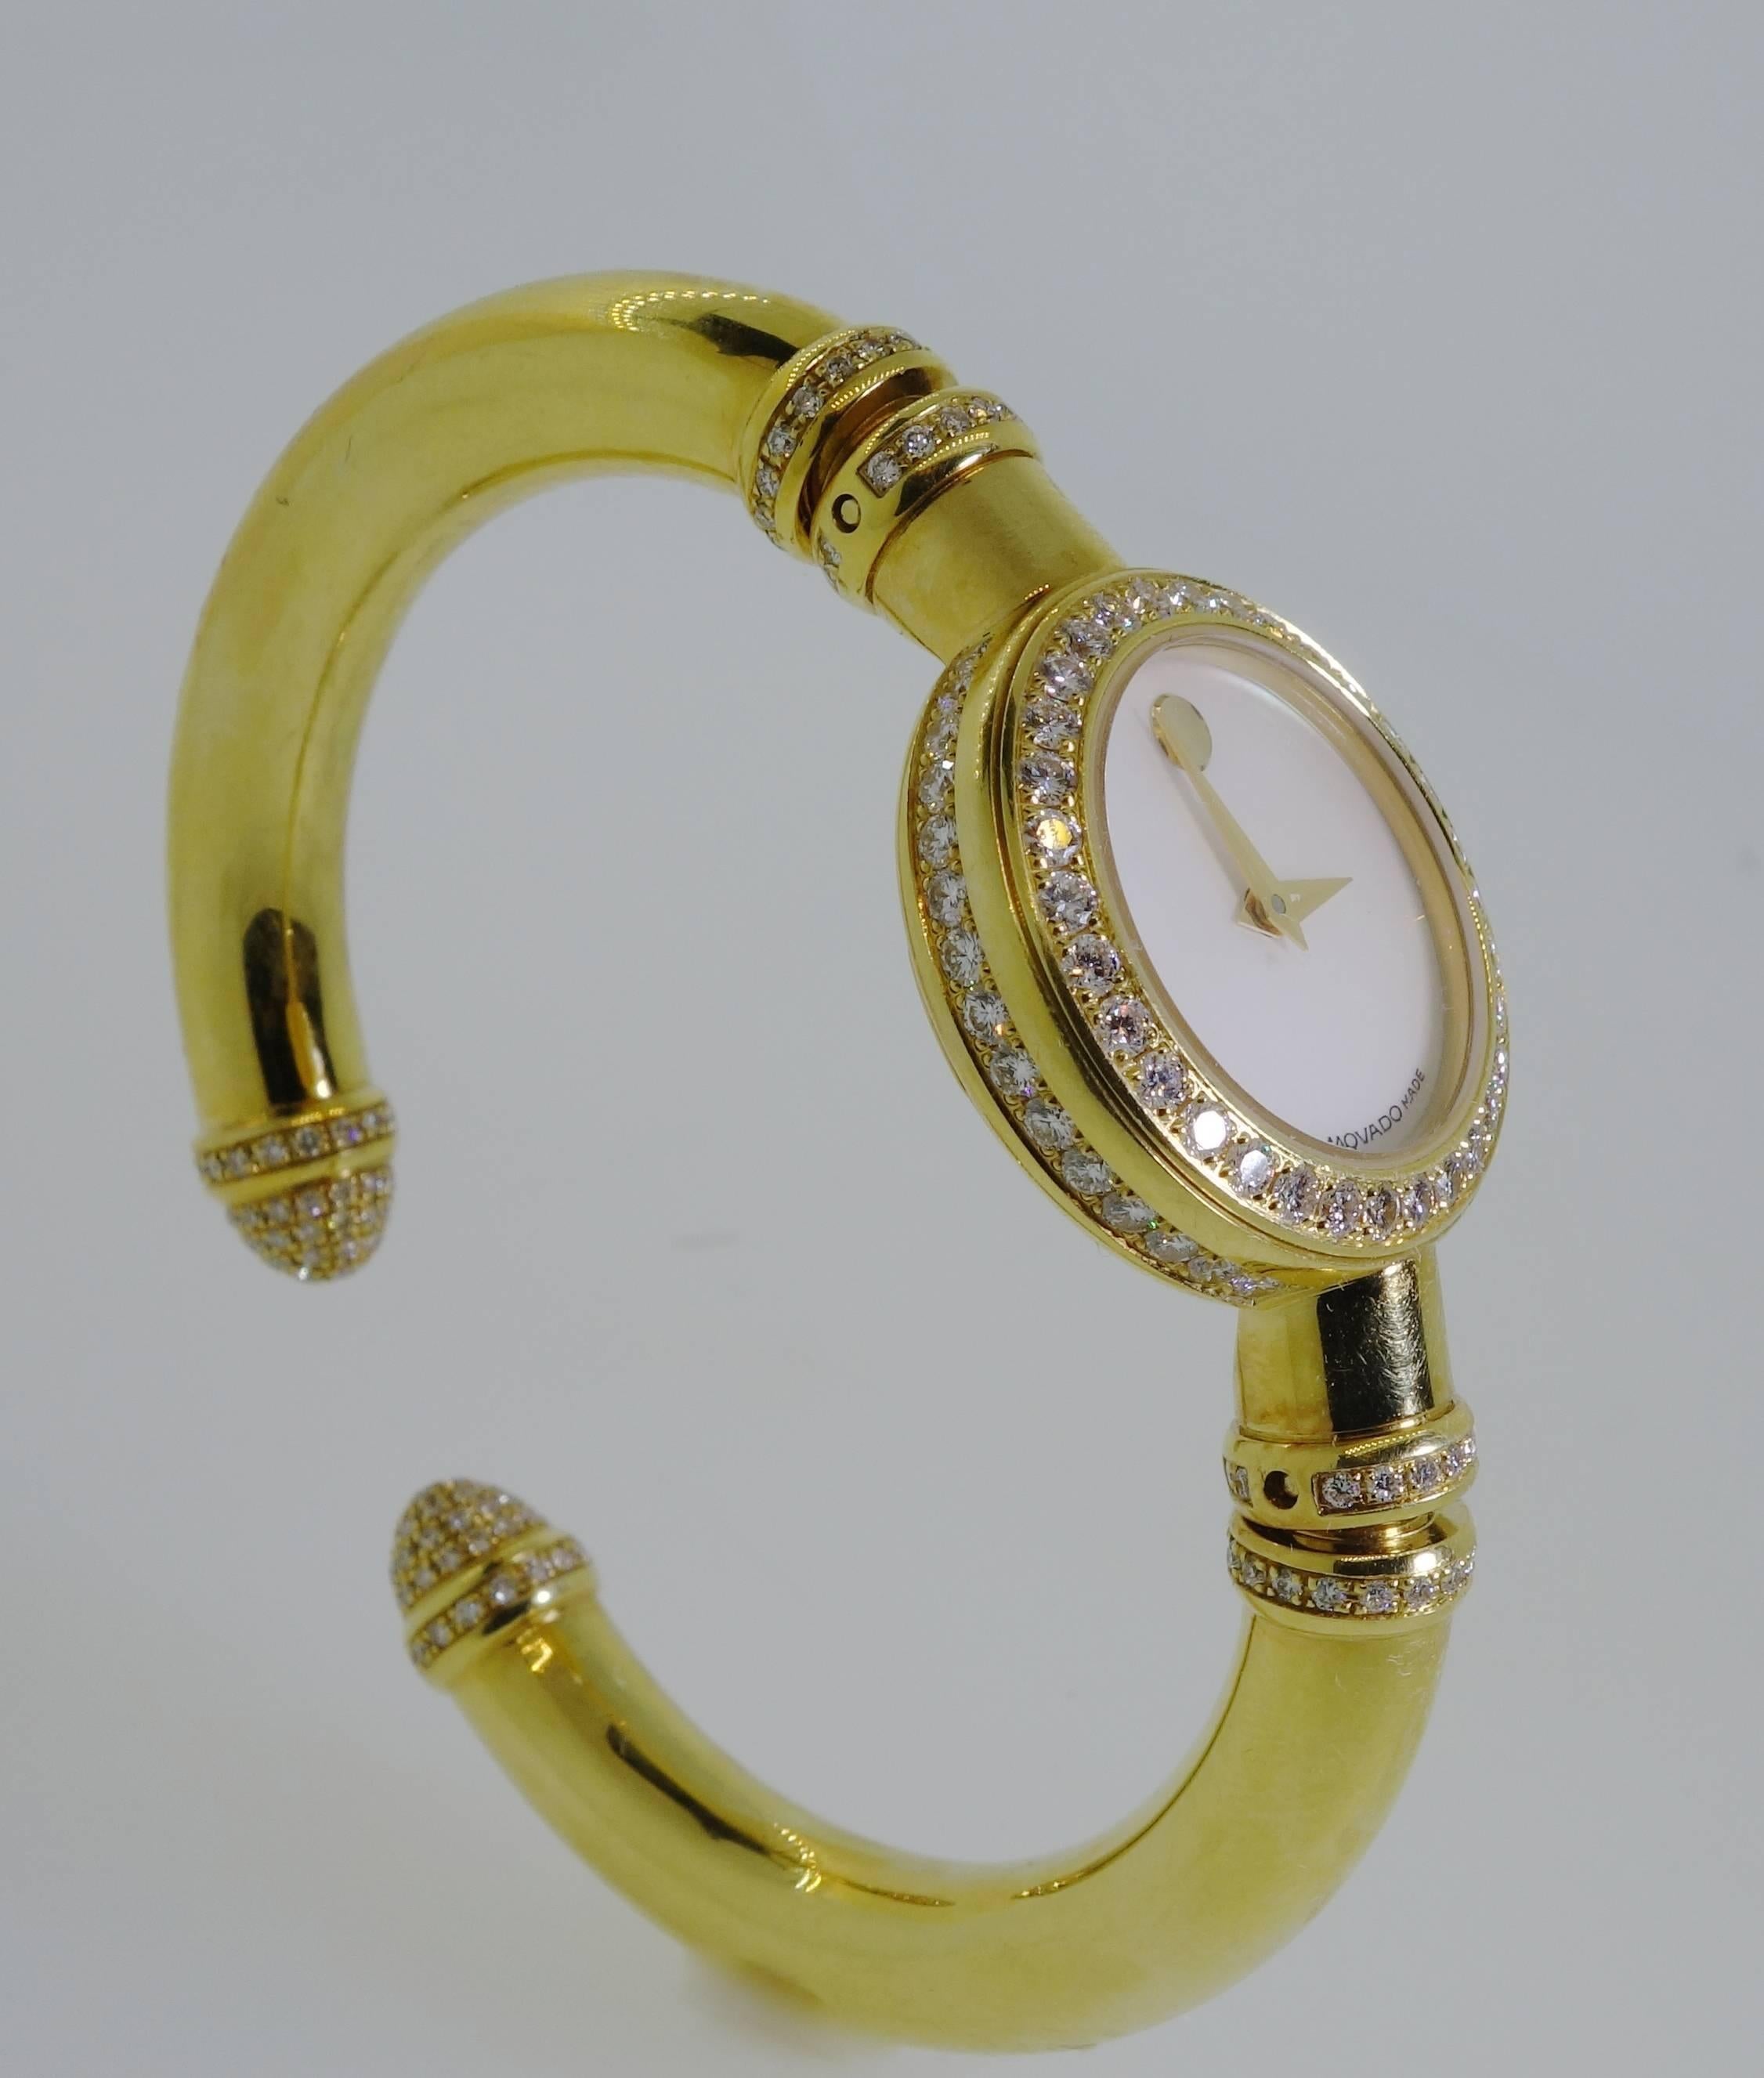 18K yellow gold bangle bracelet with 3.50 cts of diamonds - all the diamonds are well cut, near colorless (H) and very slightly included (VS).  This watch, with a mother of pearl dial, is quartz and water resistant with a sapphire crystal and by the